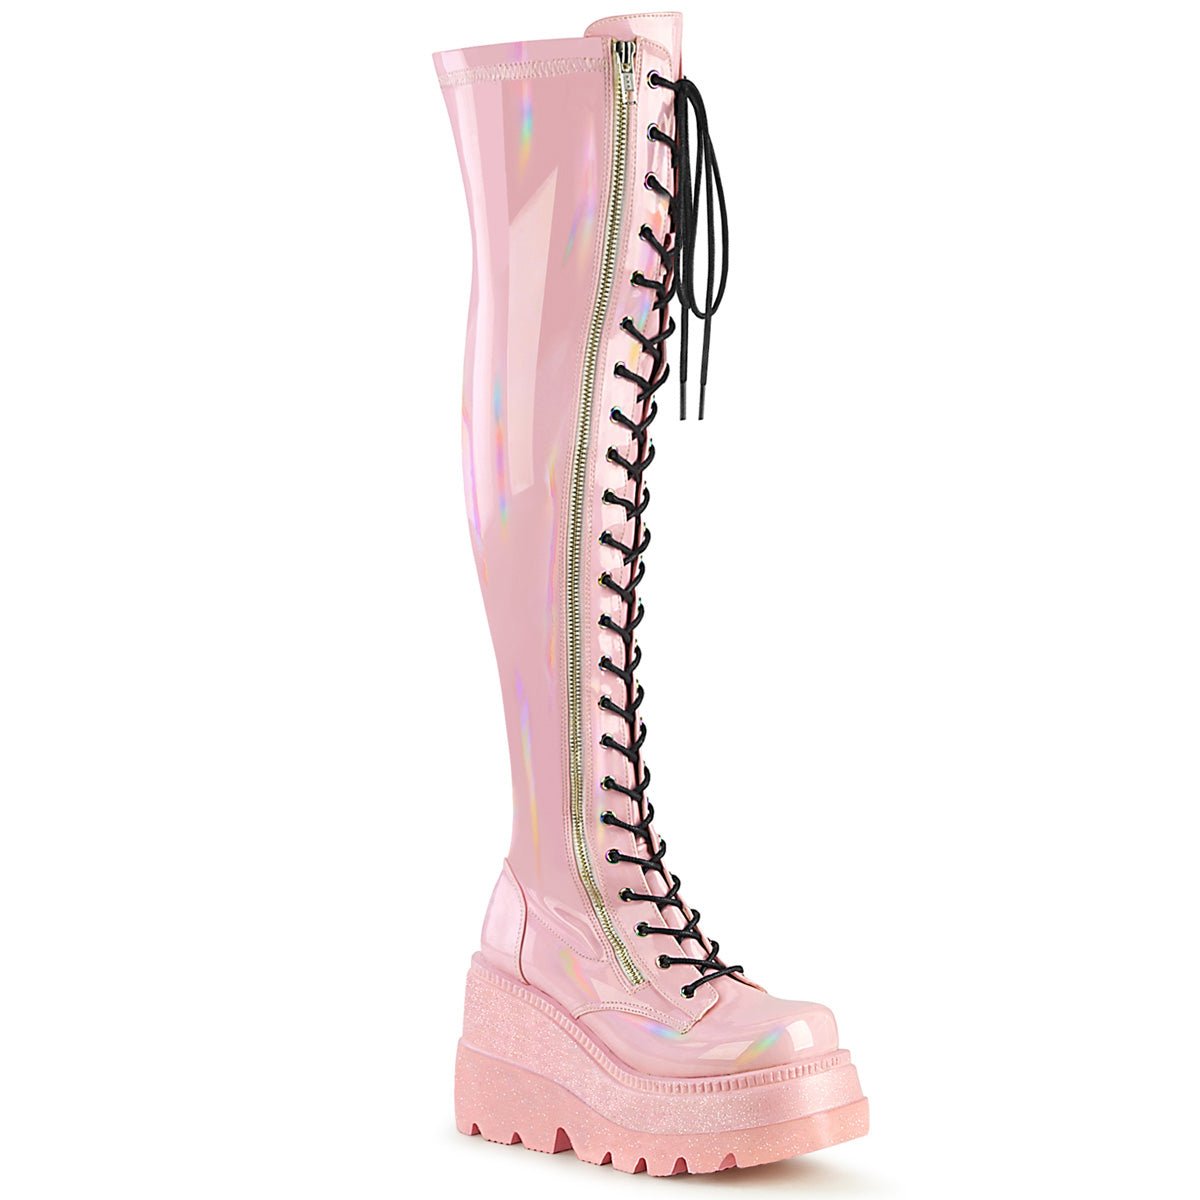 Too Fast | Demonia Shaker 374 | Baby Pink Hologram Stretch Patent Leather Women's Over The Knee Boots